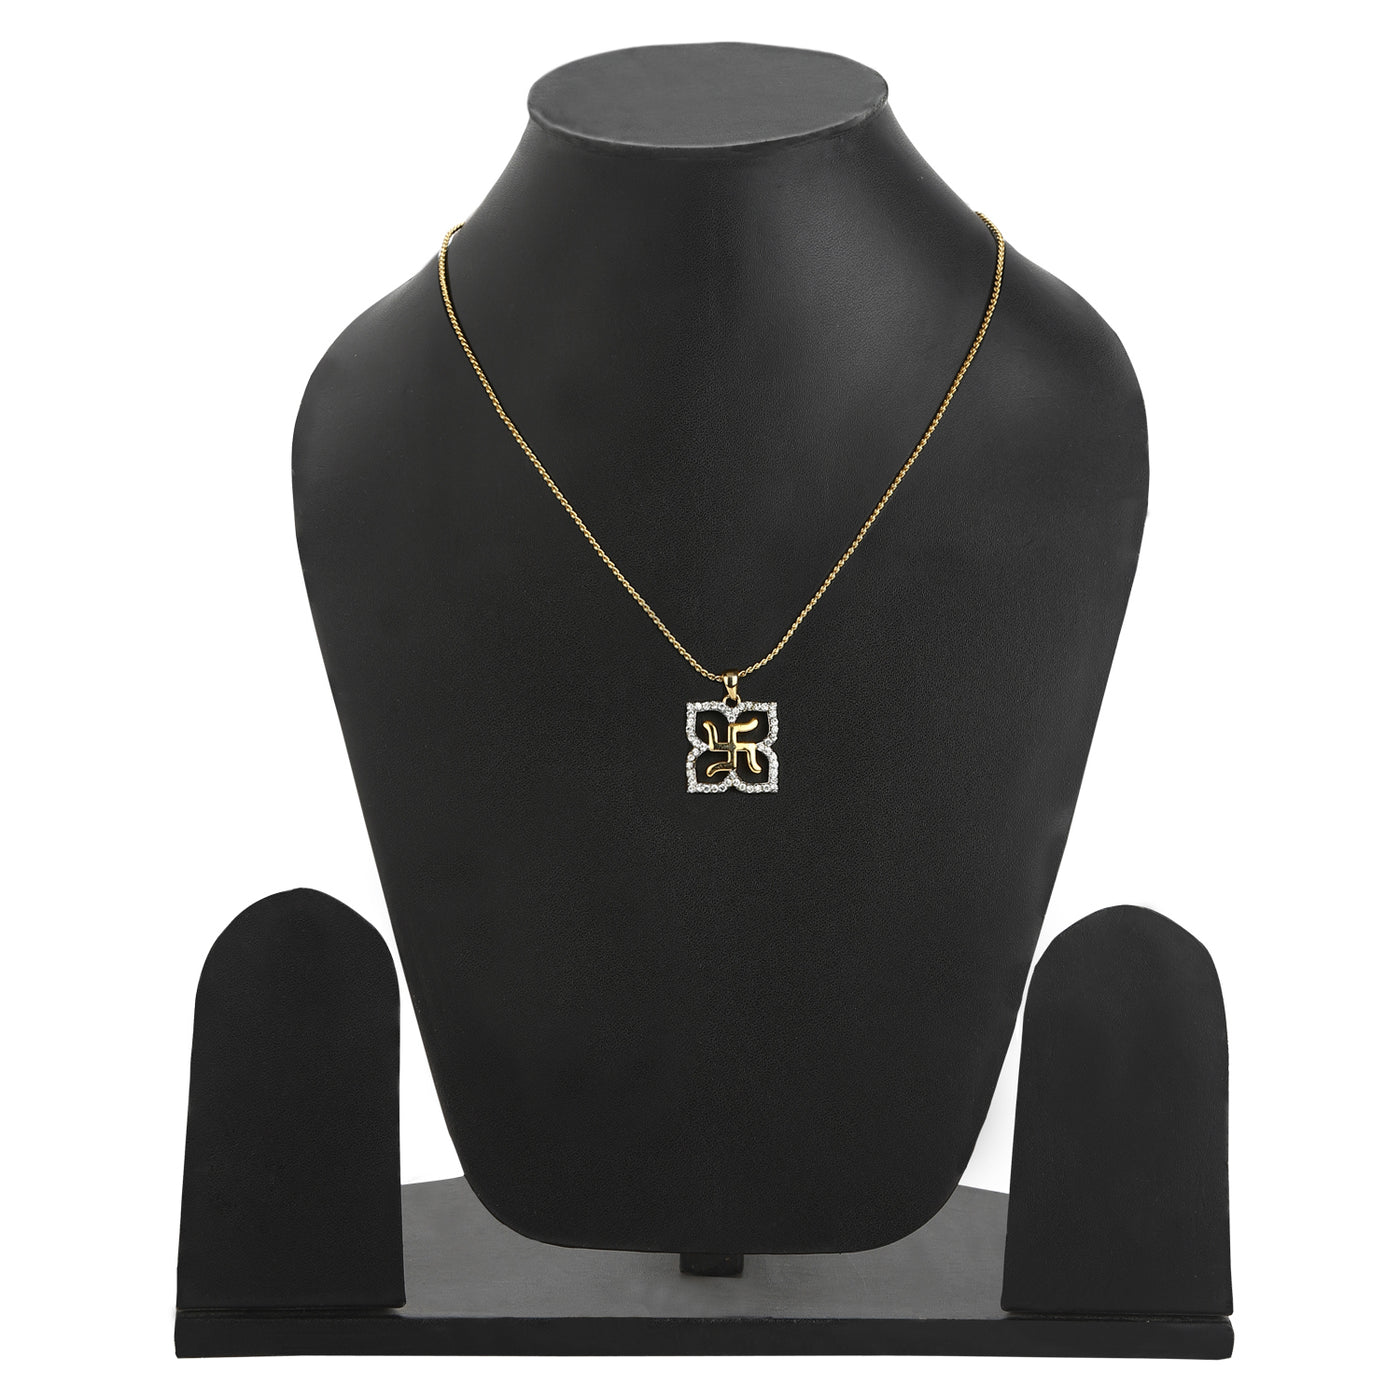 Estele - Gold Plated Swastika Shaped Pendant with Austrian Crystals for Women / Girls